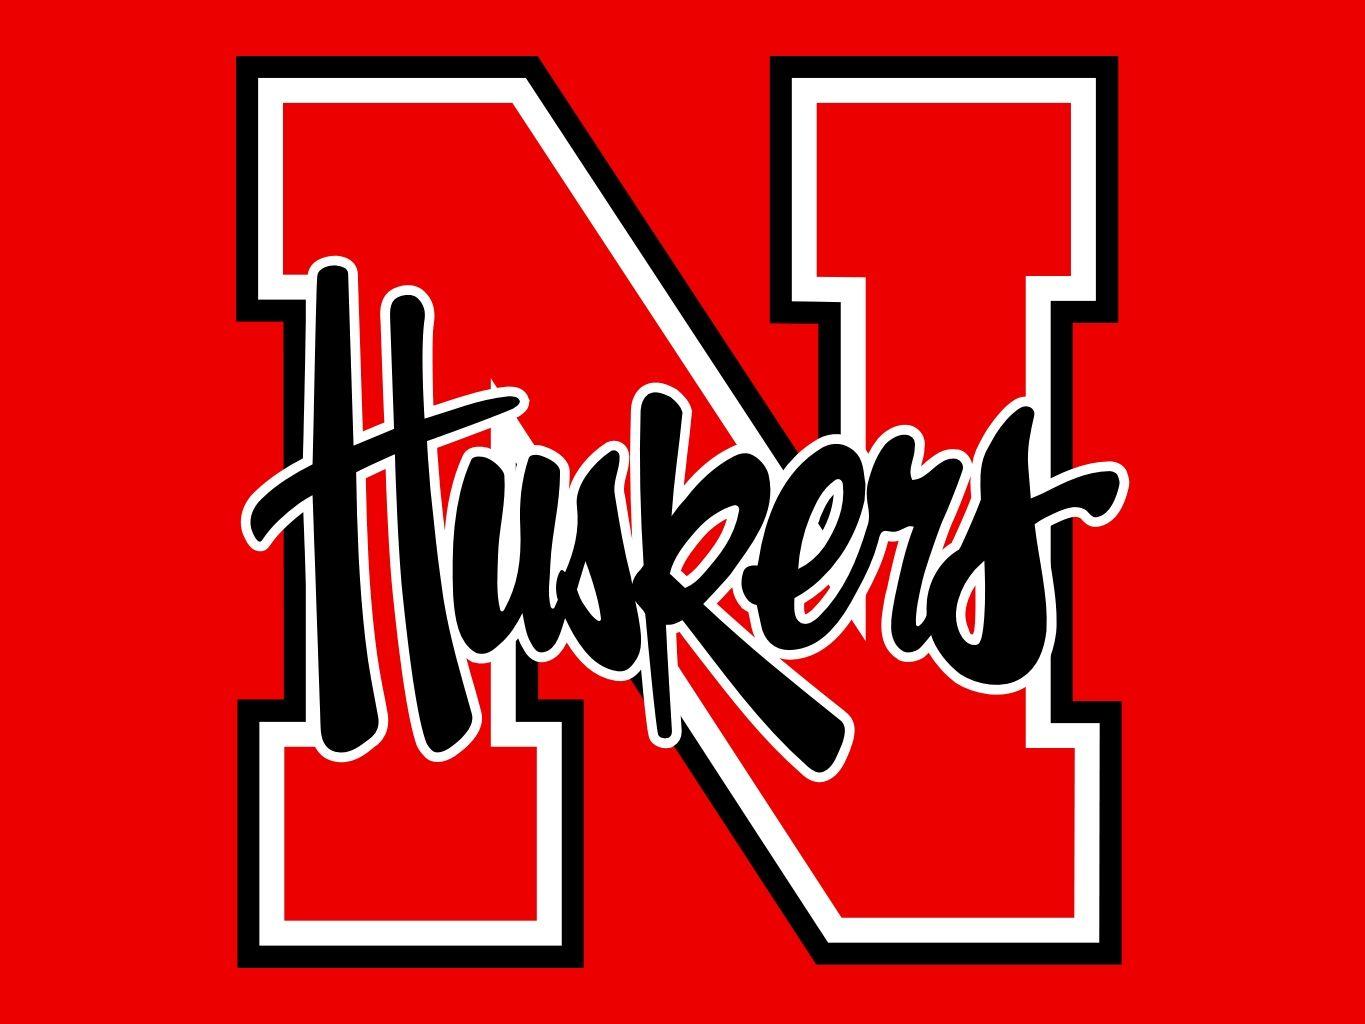 Huskers Logo - Free Huskers Cliparts, Download Free Clip Art, Free Clip Art on ...